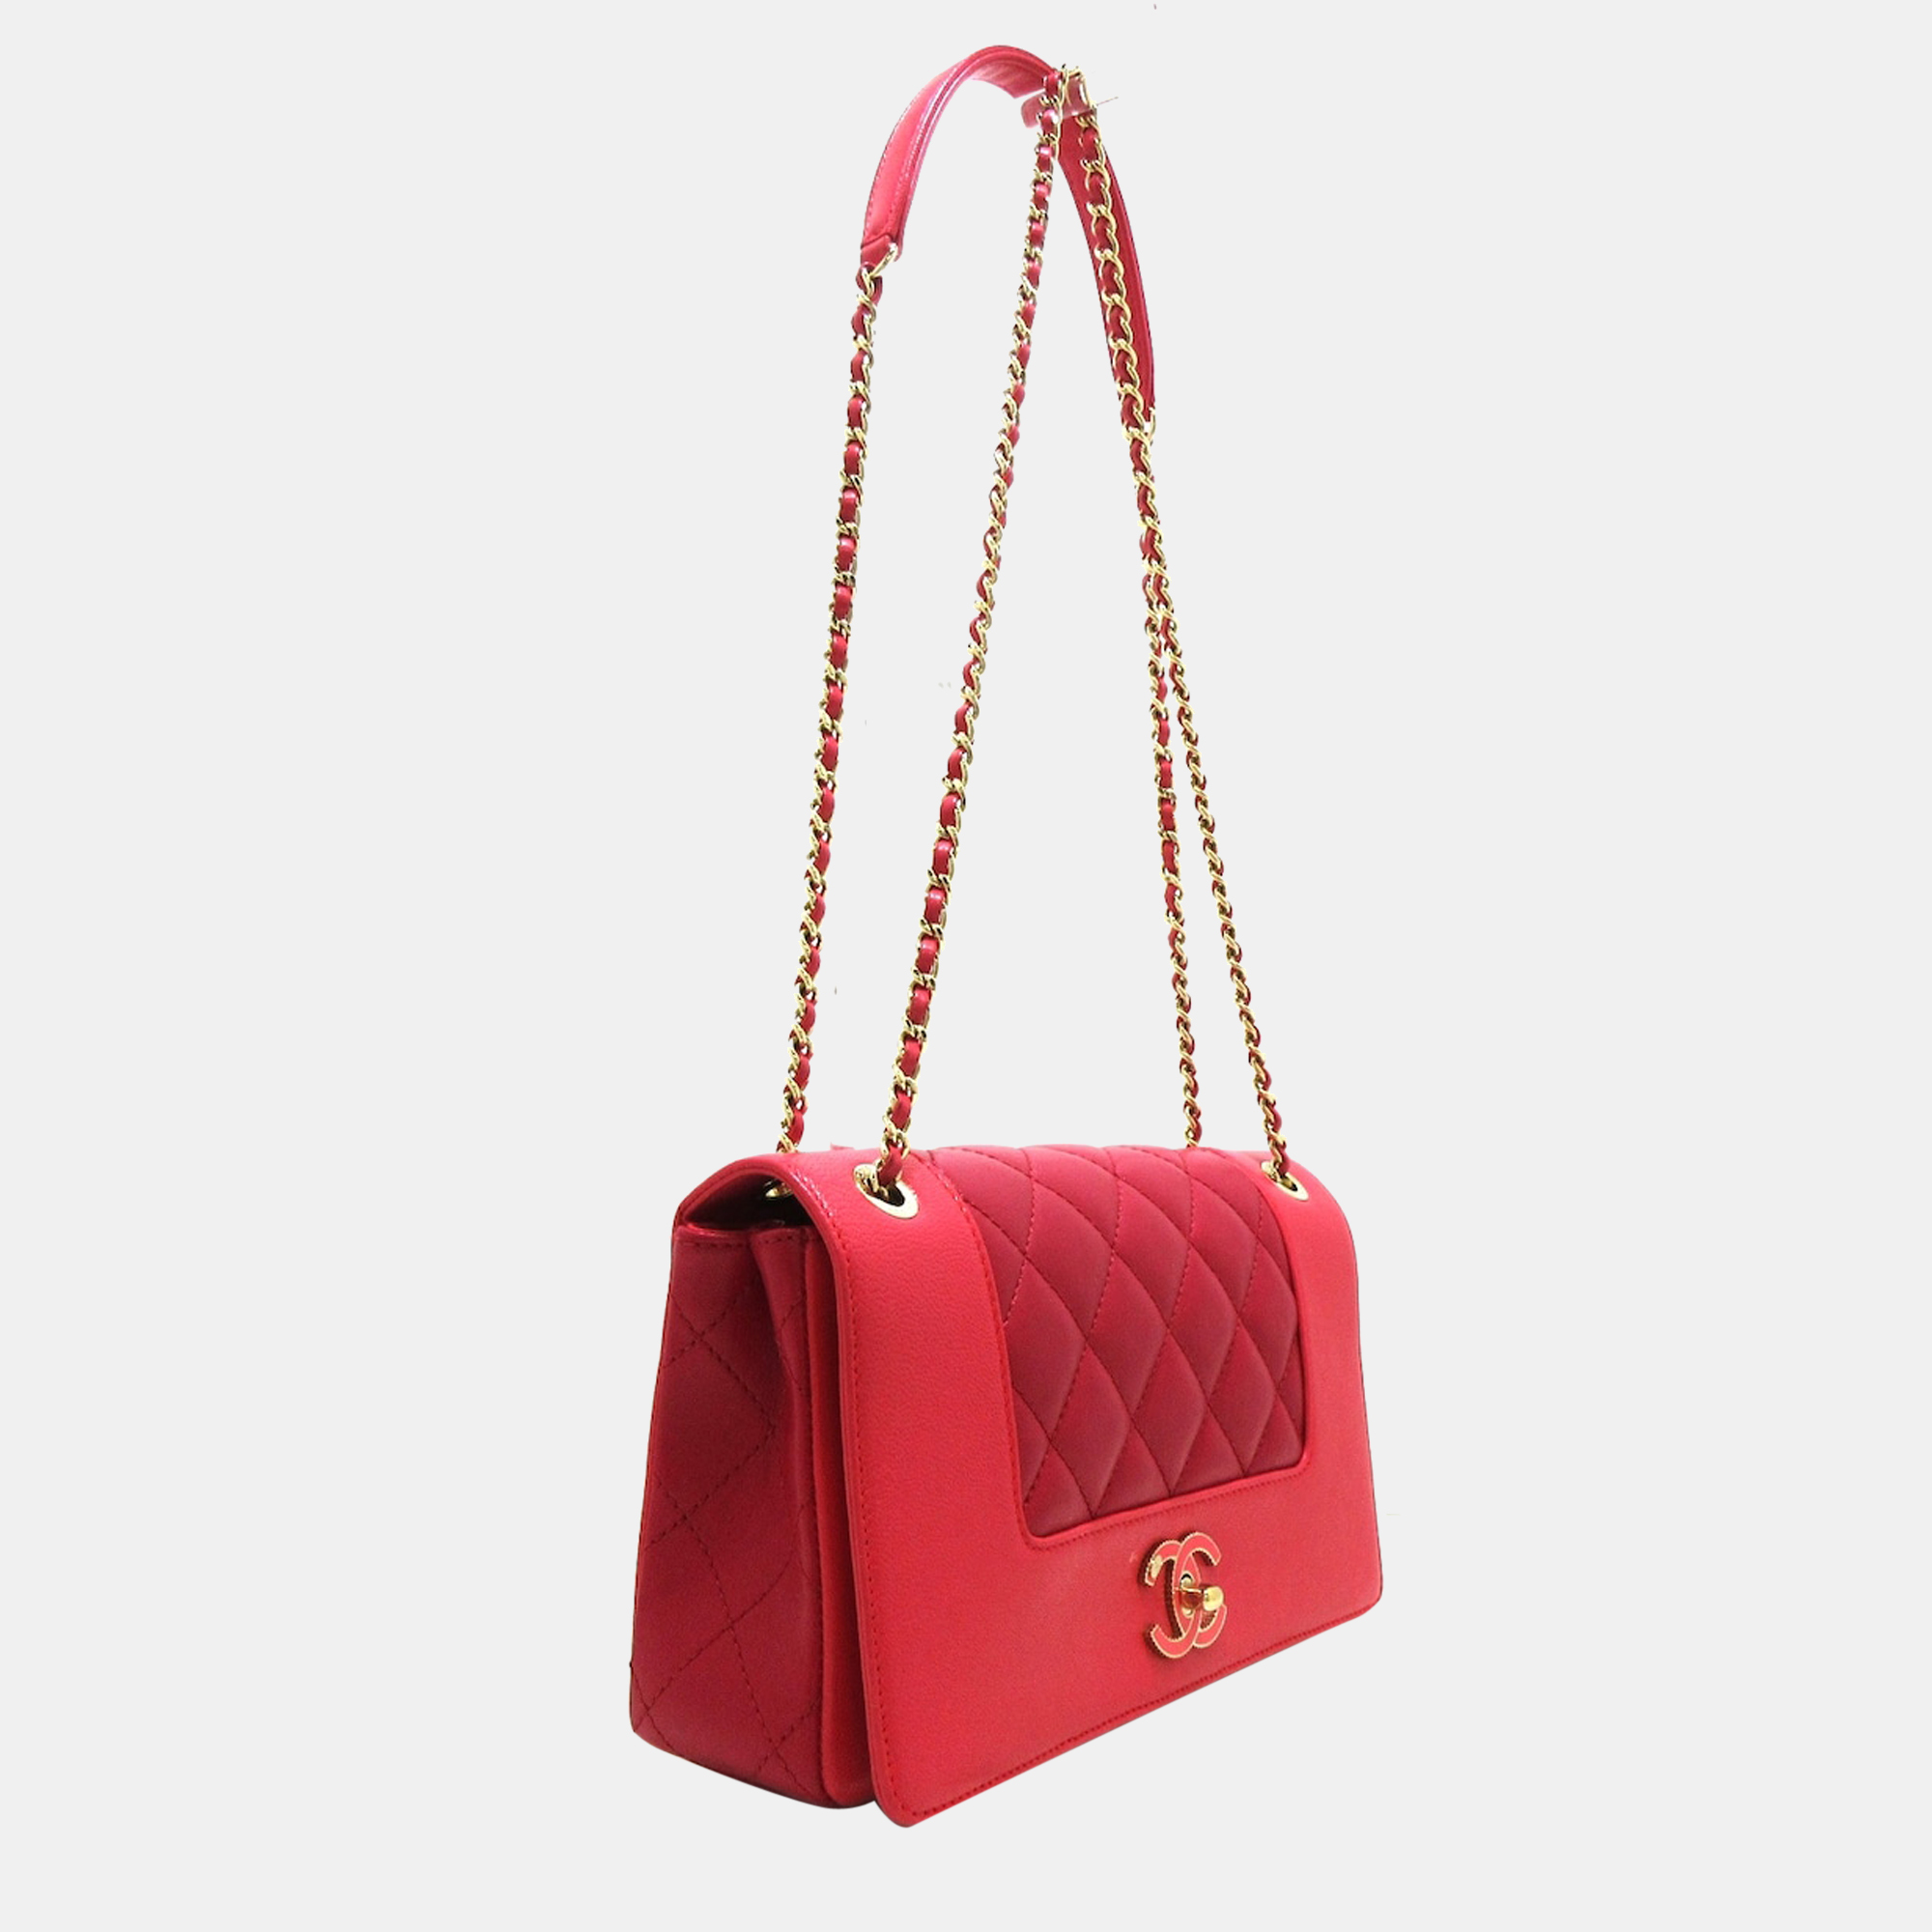 

Chanel Red Leather Mademoiselle Vintage Flap Bag